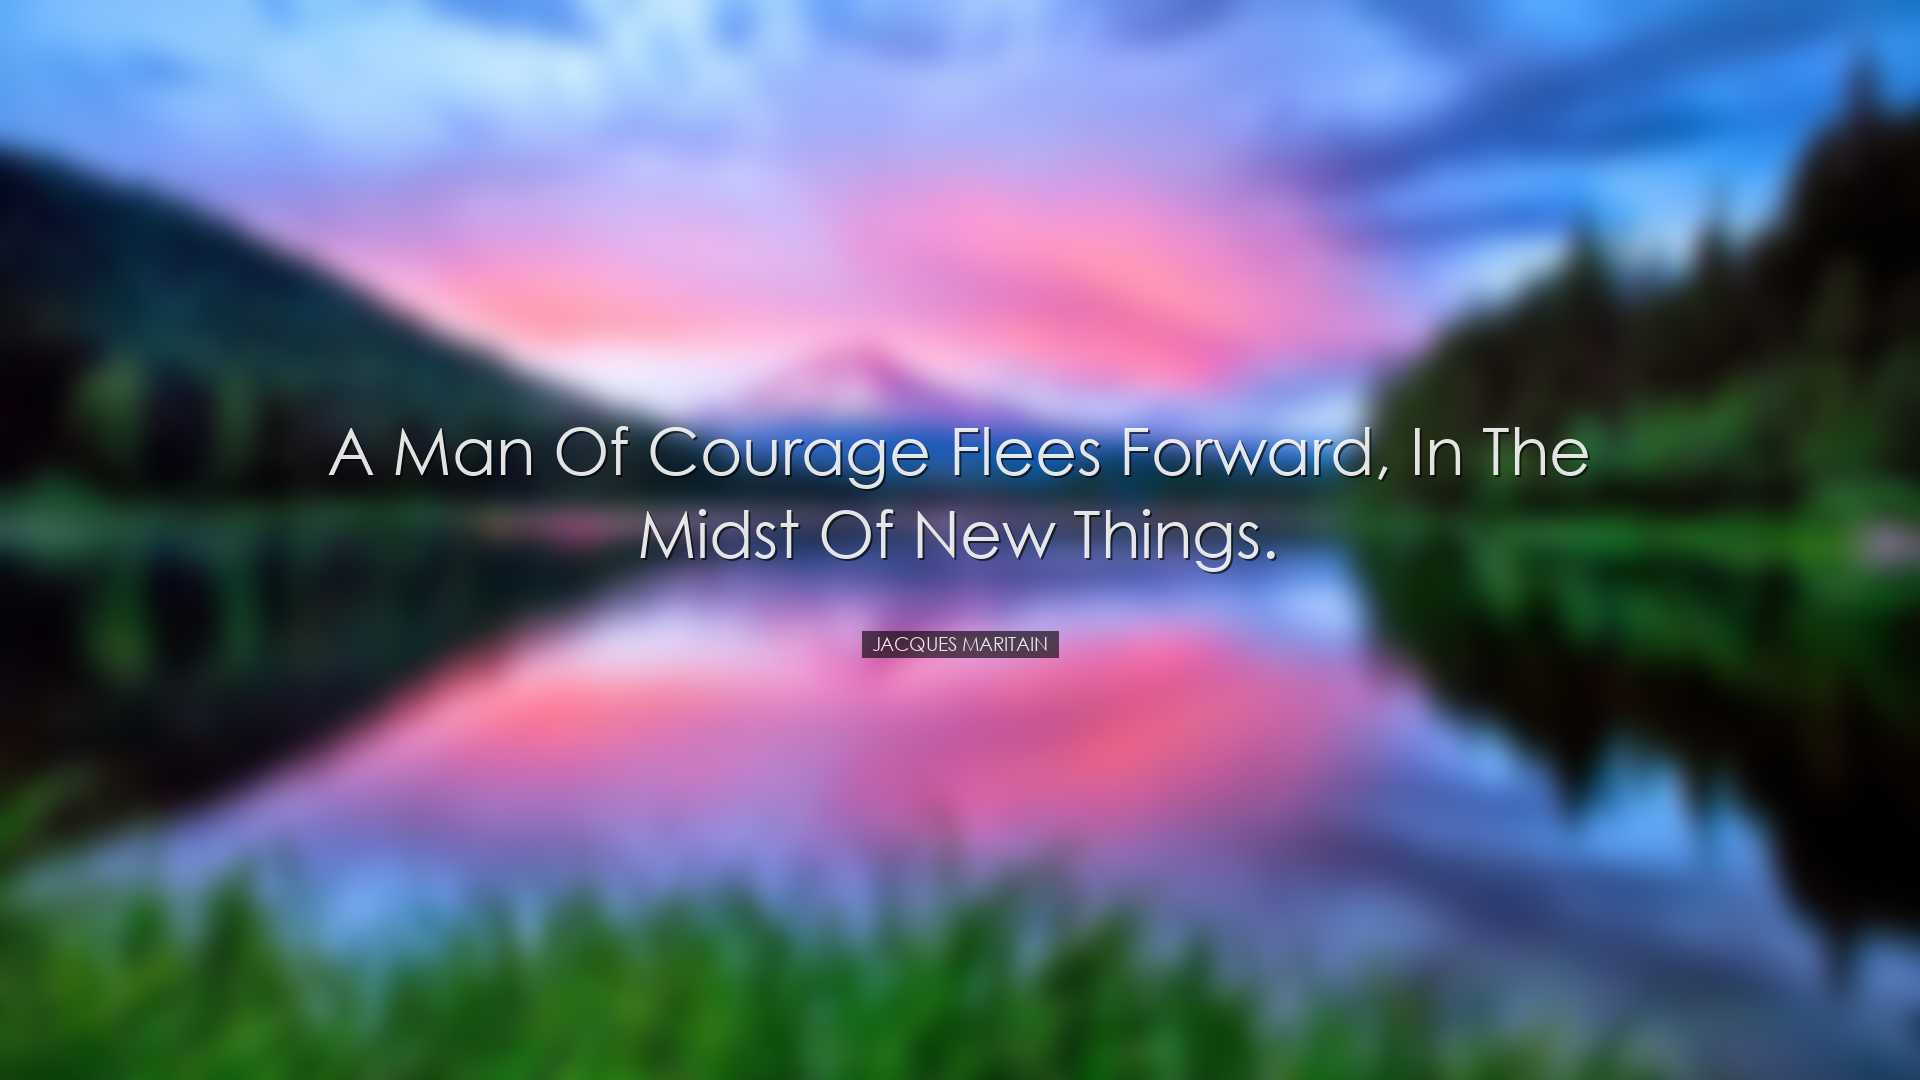 A man of courage flees forward, in the midst of new things. - Jacq